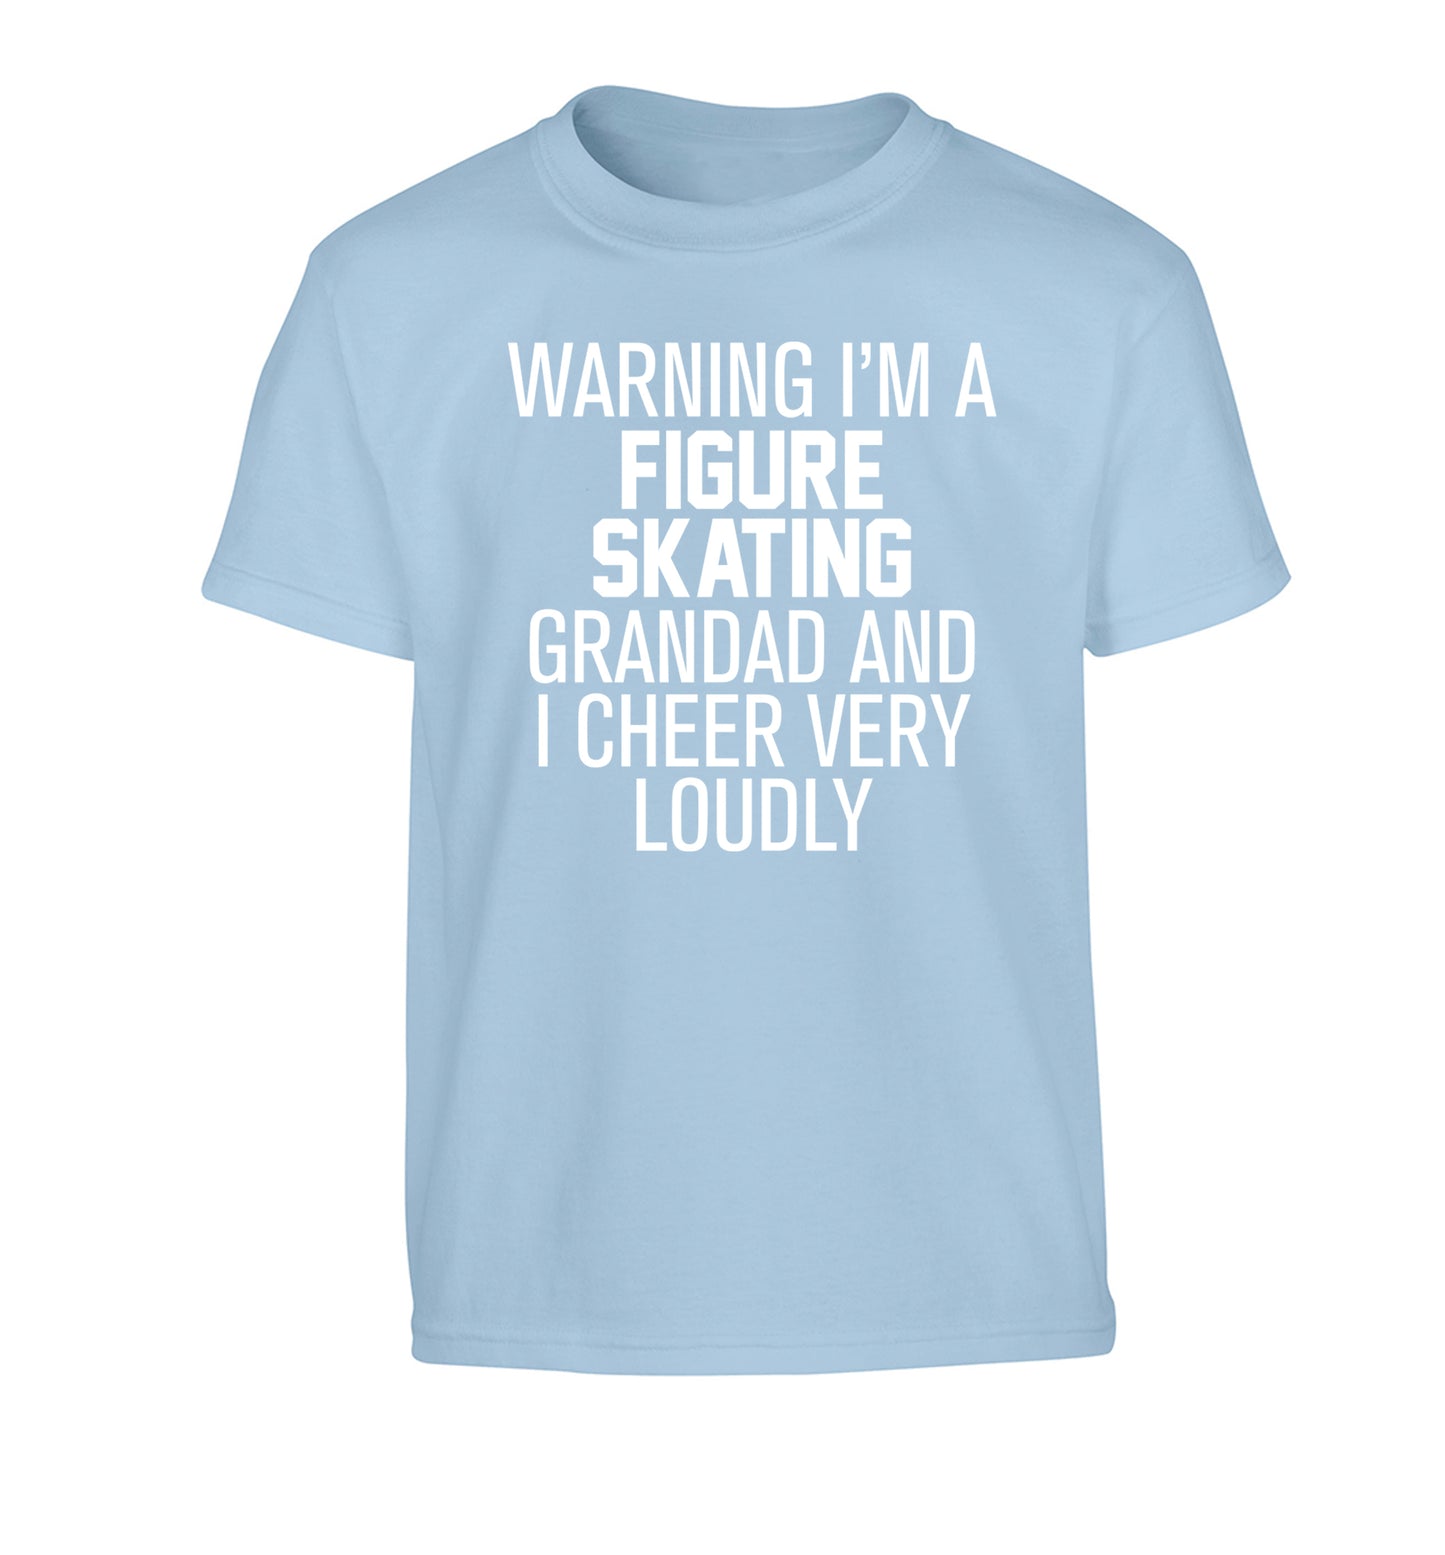 Warning I'm a figure skating grandad and I cheer very loudly Children's light blue Tshirt 12-14 Years